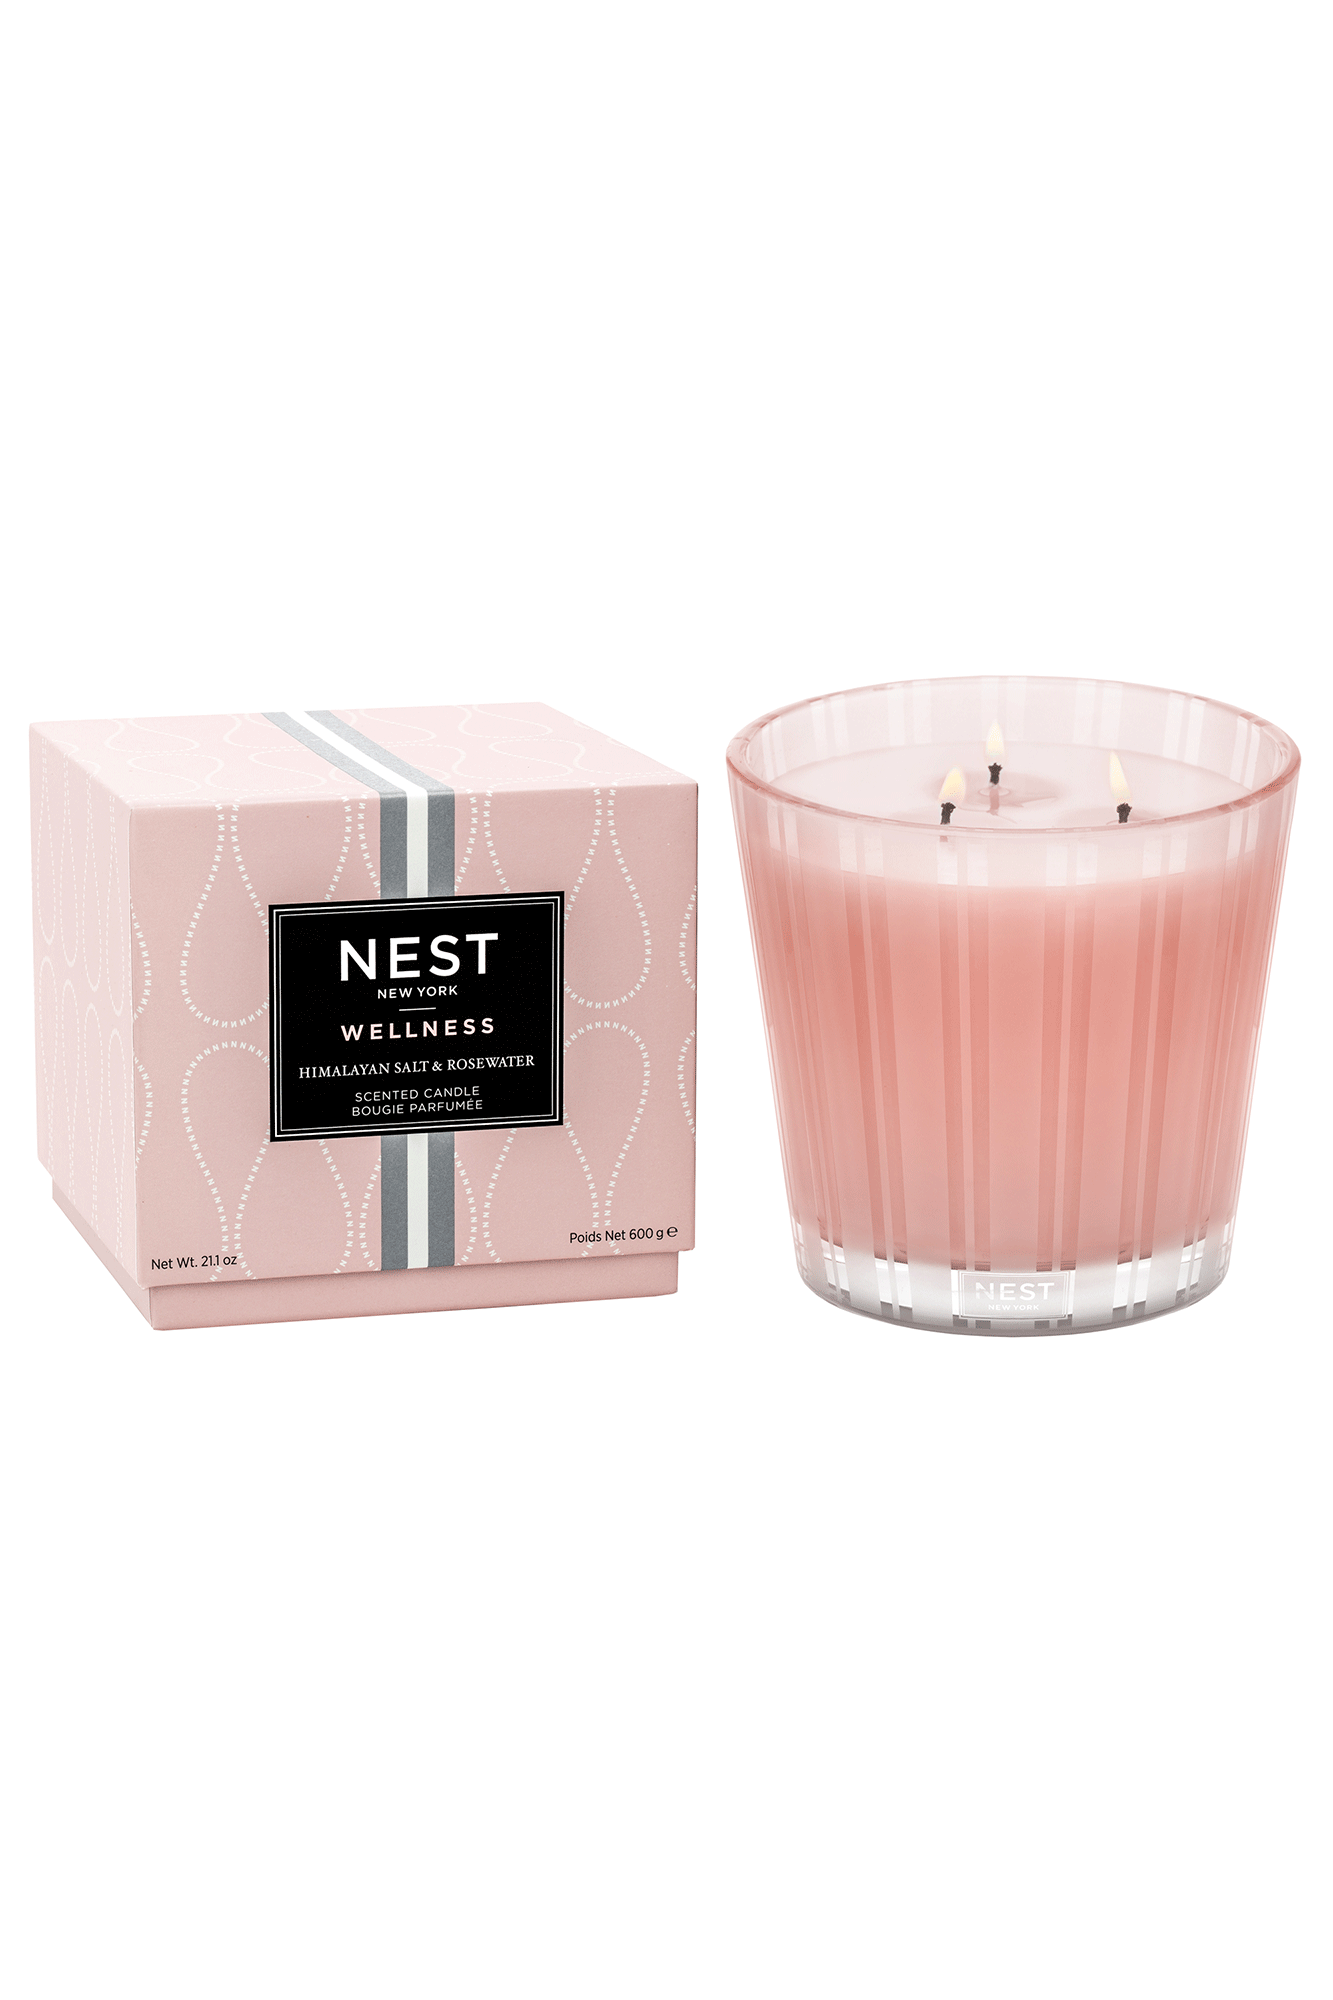 Enjoy a calming atmosphere with the Himalayan Salt & Rosewater 3 Wick Candle from Nest. Infused with notes of rosewater, geranium, salted amber, and white woods, this scented candle will help to ease your mind and soothe your spirit.